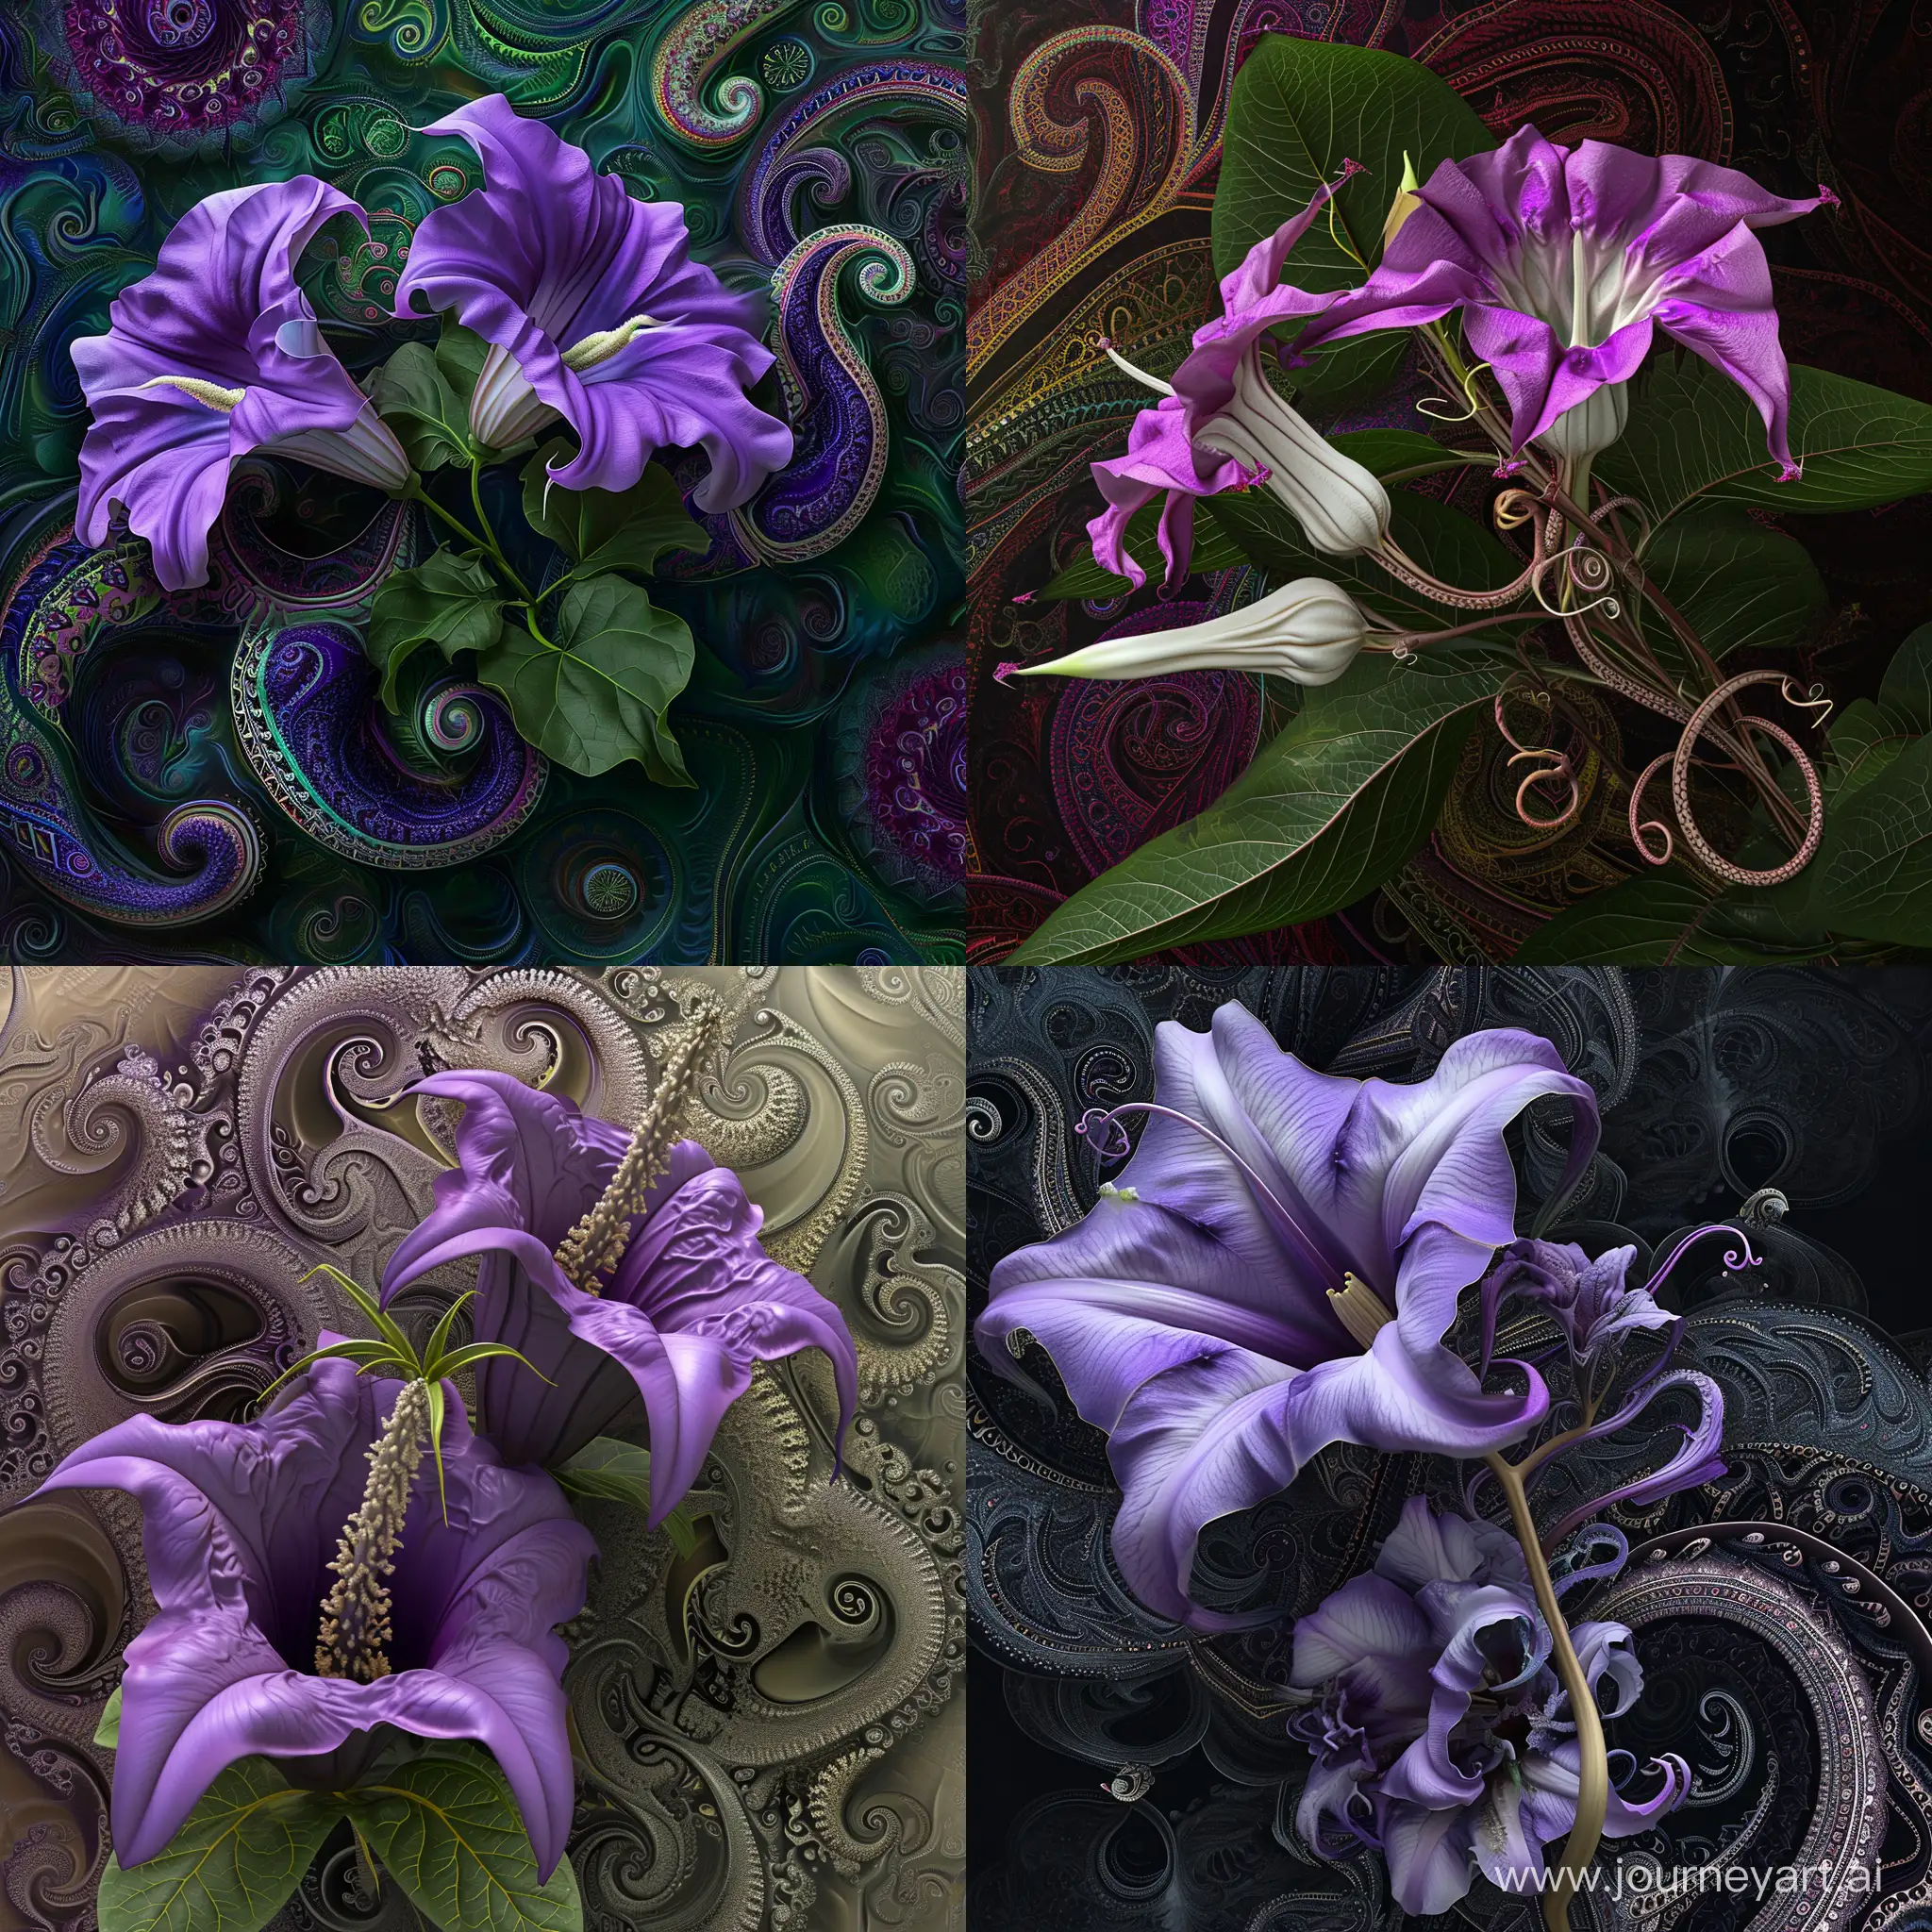 Create a photorealistic 3d image of a Double Purple Datura in a surreal paisley fractal